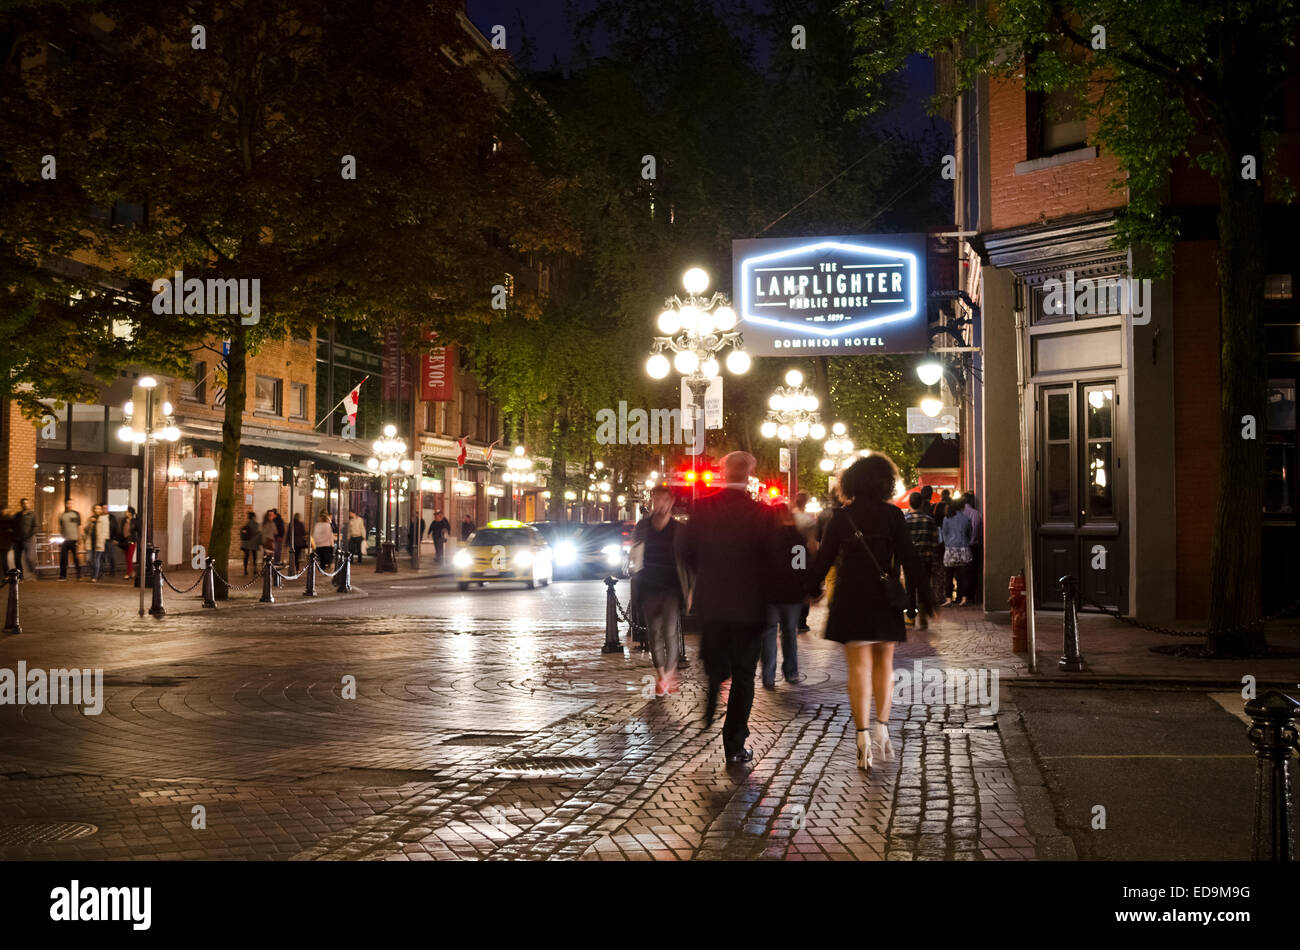 Nightlife on the streets of Gastown in Vancouver, Canada.  Lamplighter Public House Stock Photo